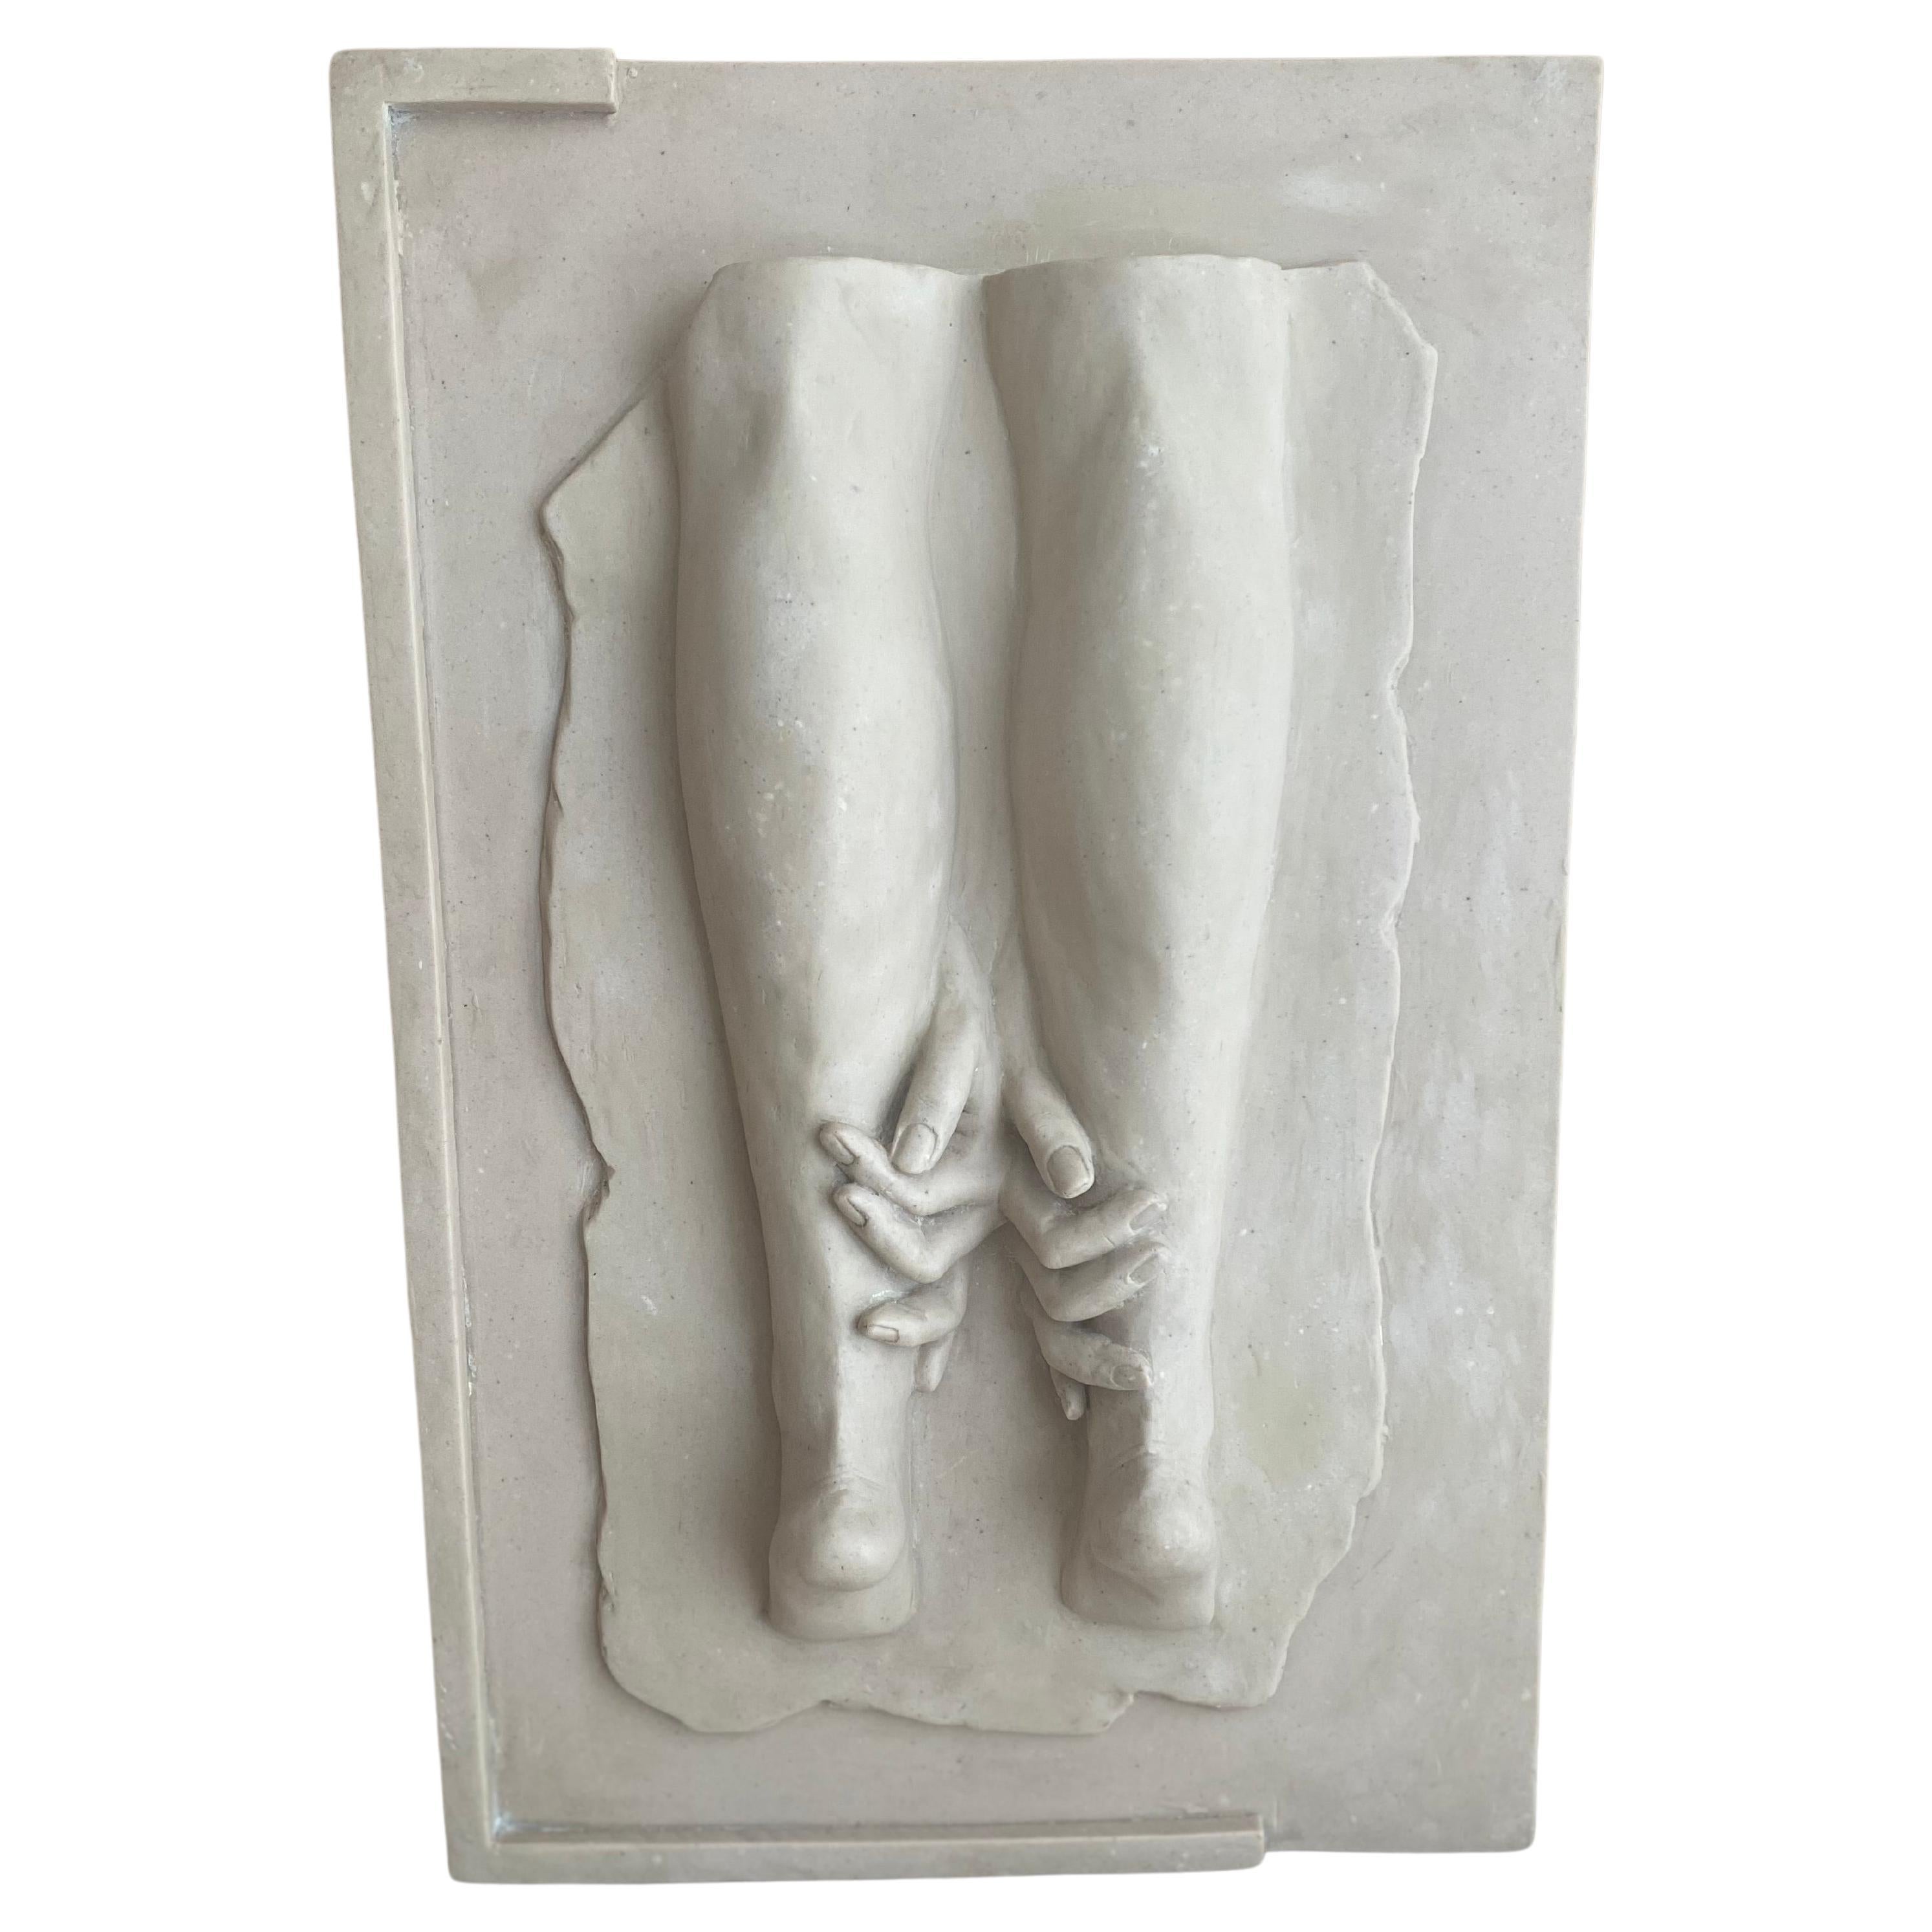 Marcela Cure Female's Legs Wall Art Sculpture Resin and Stone - Number 21